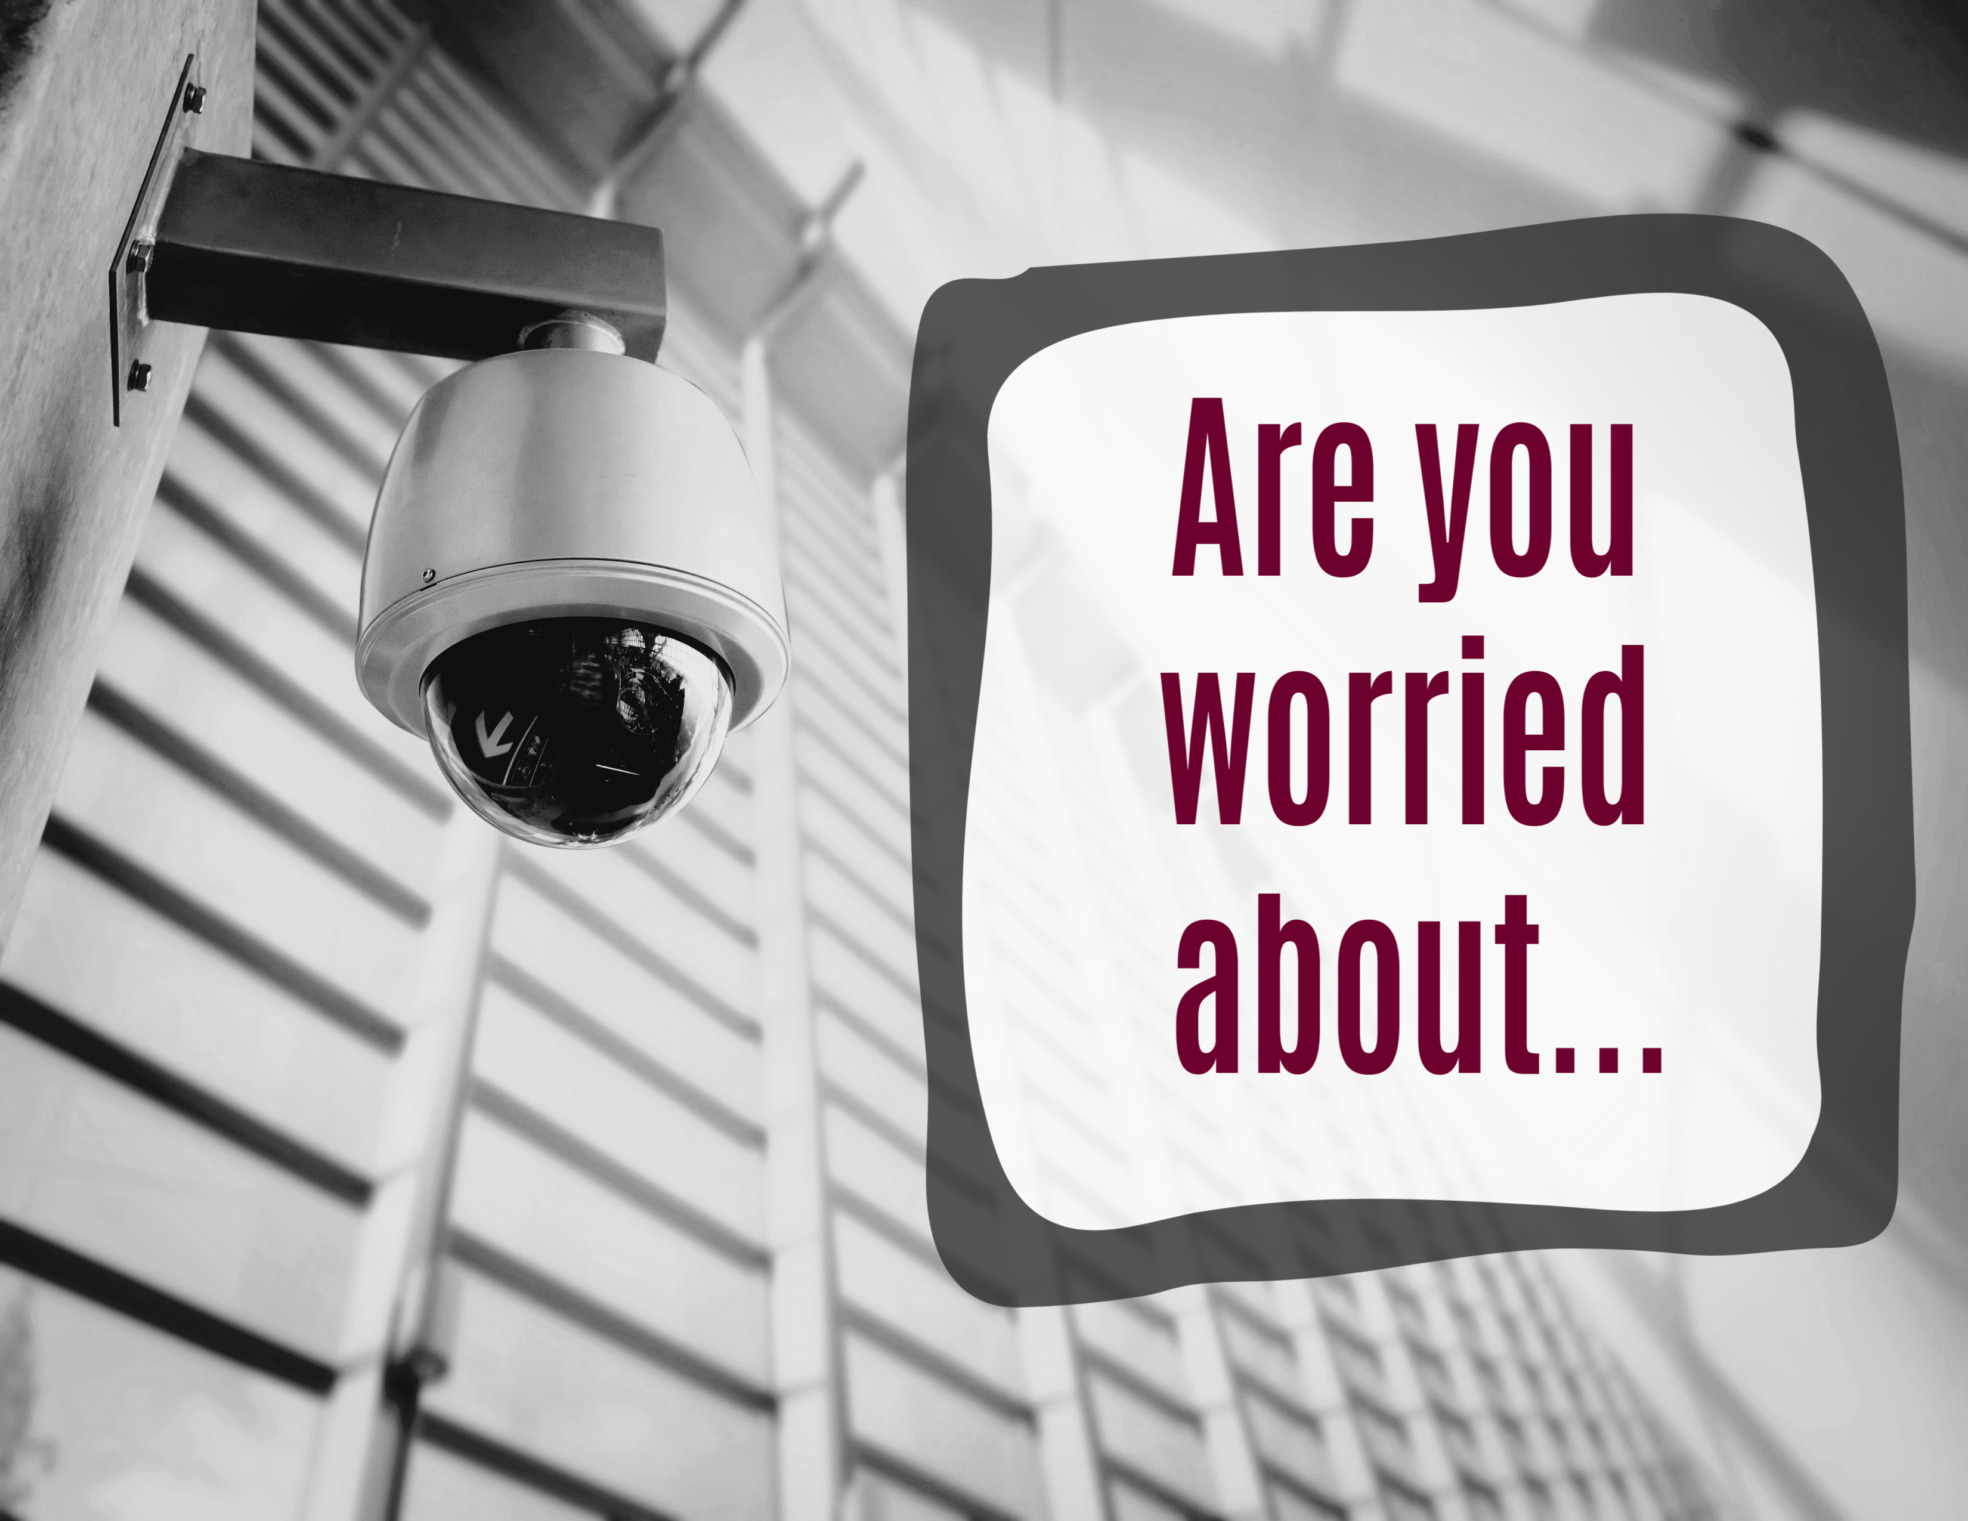 Why does your business need a surveillance system?